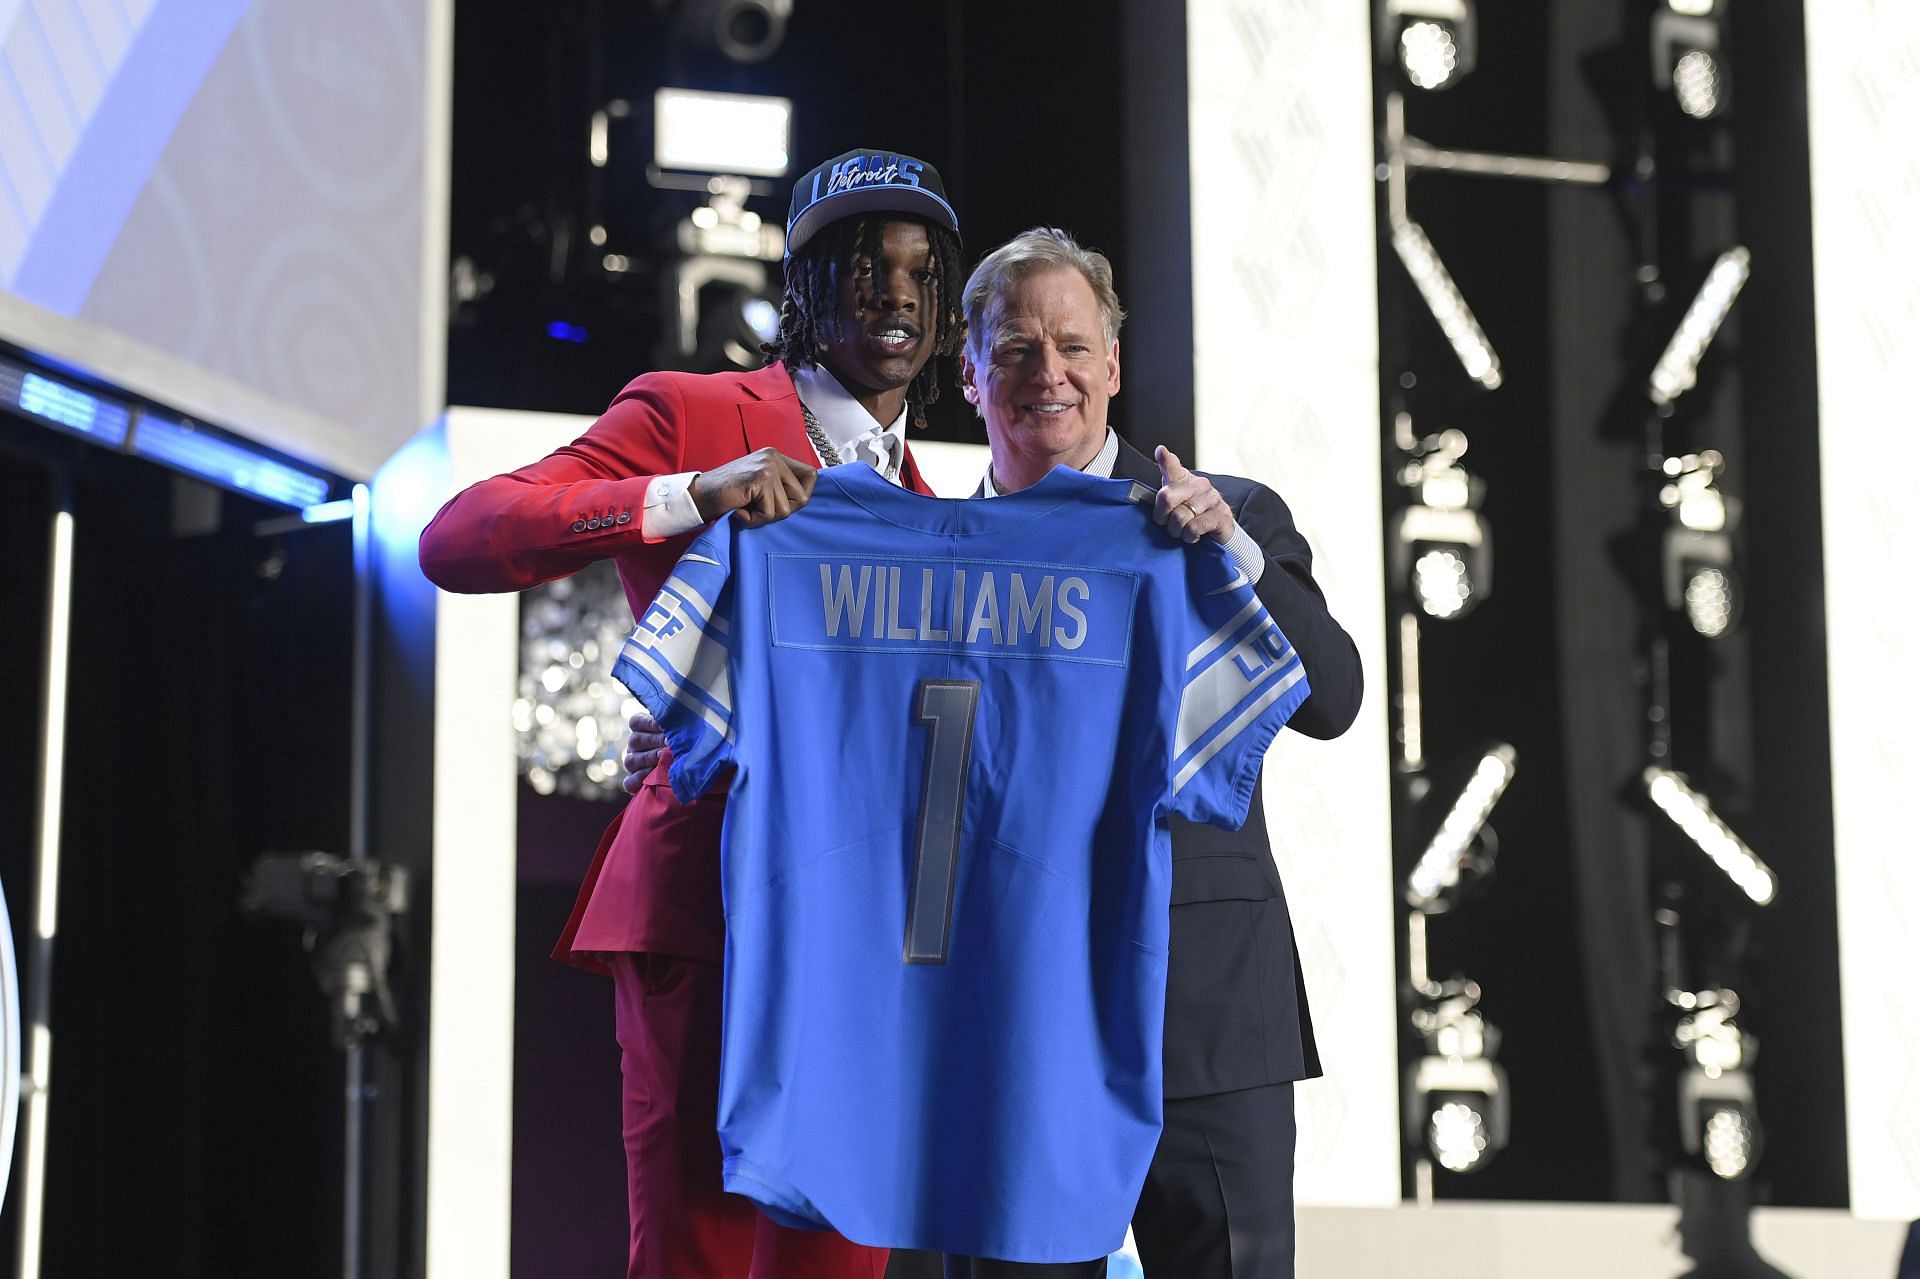 2022 NFL Draft - Round 1, Detroit selects Jameson Williams with the 12th pick